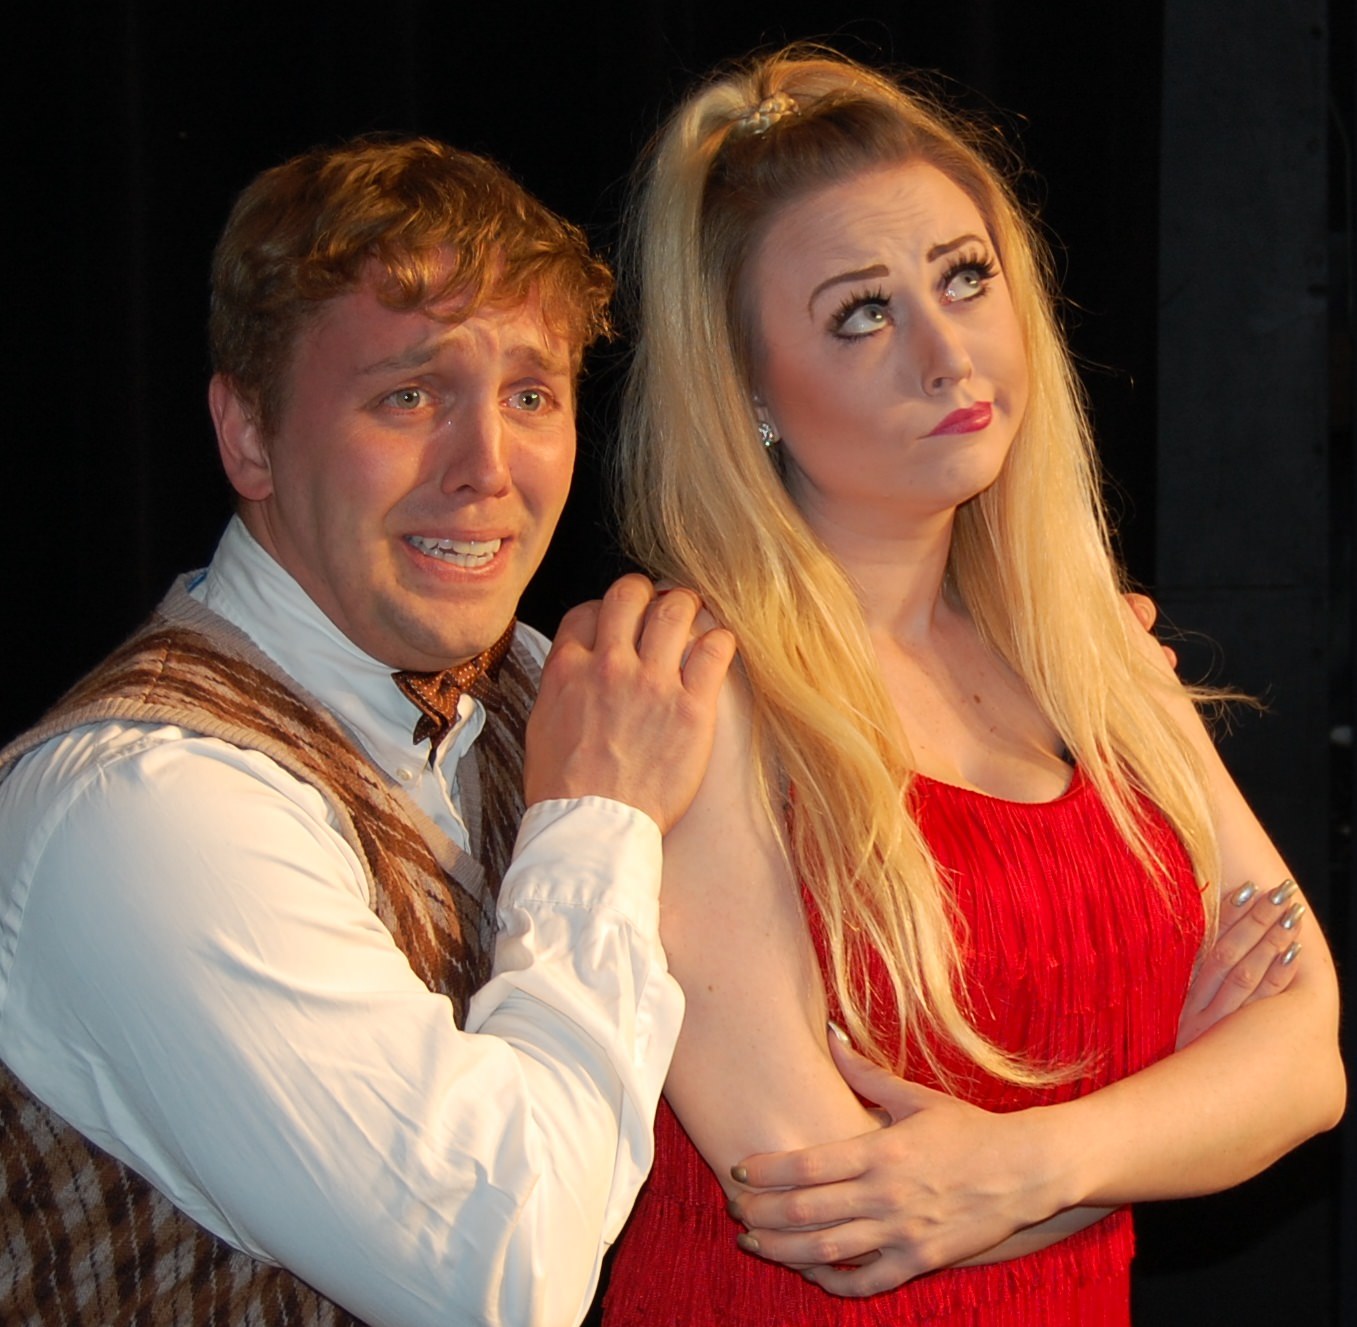 Charity (Lori Smith) contemplates if Oscar (Zak Shugart) is the guy for her in the musical Sweet Charity